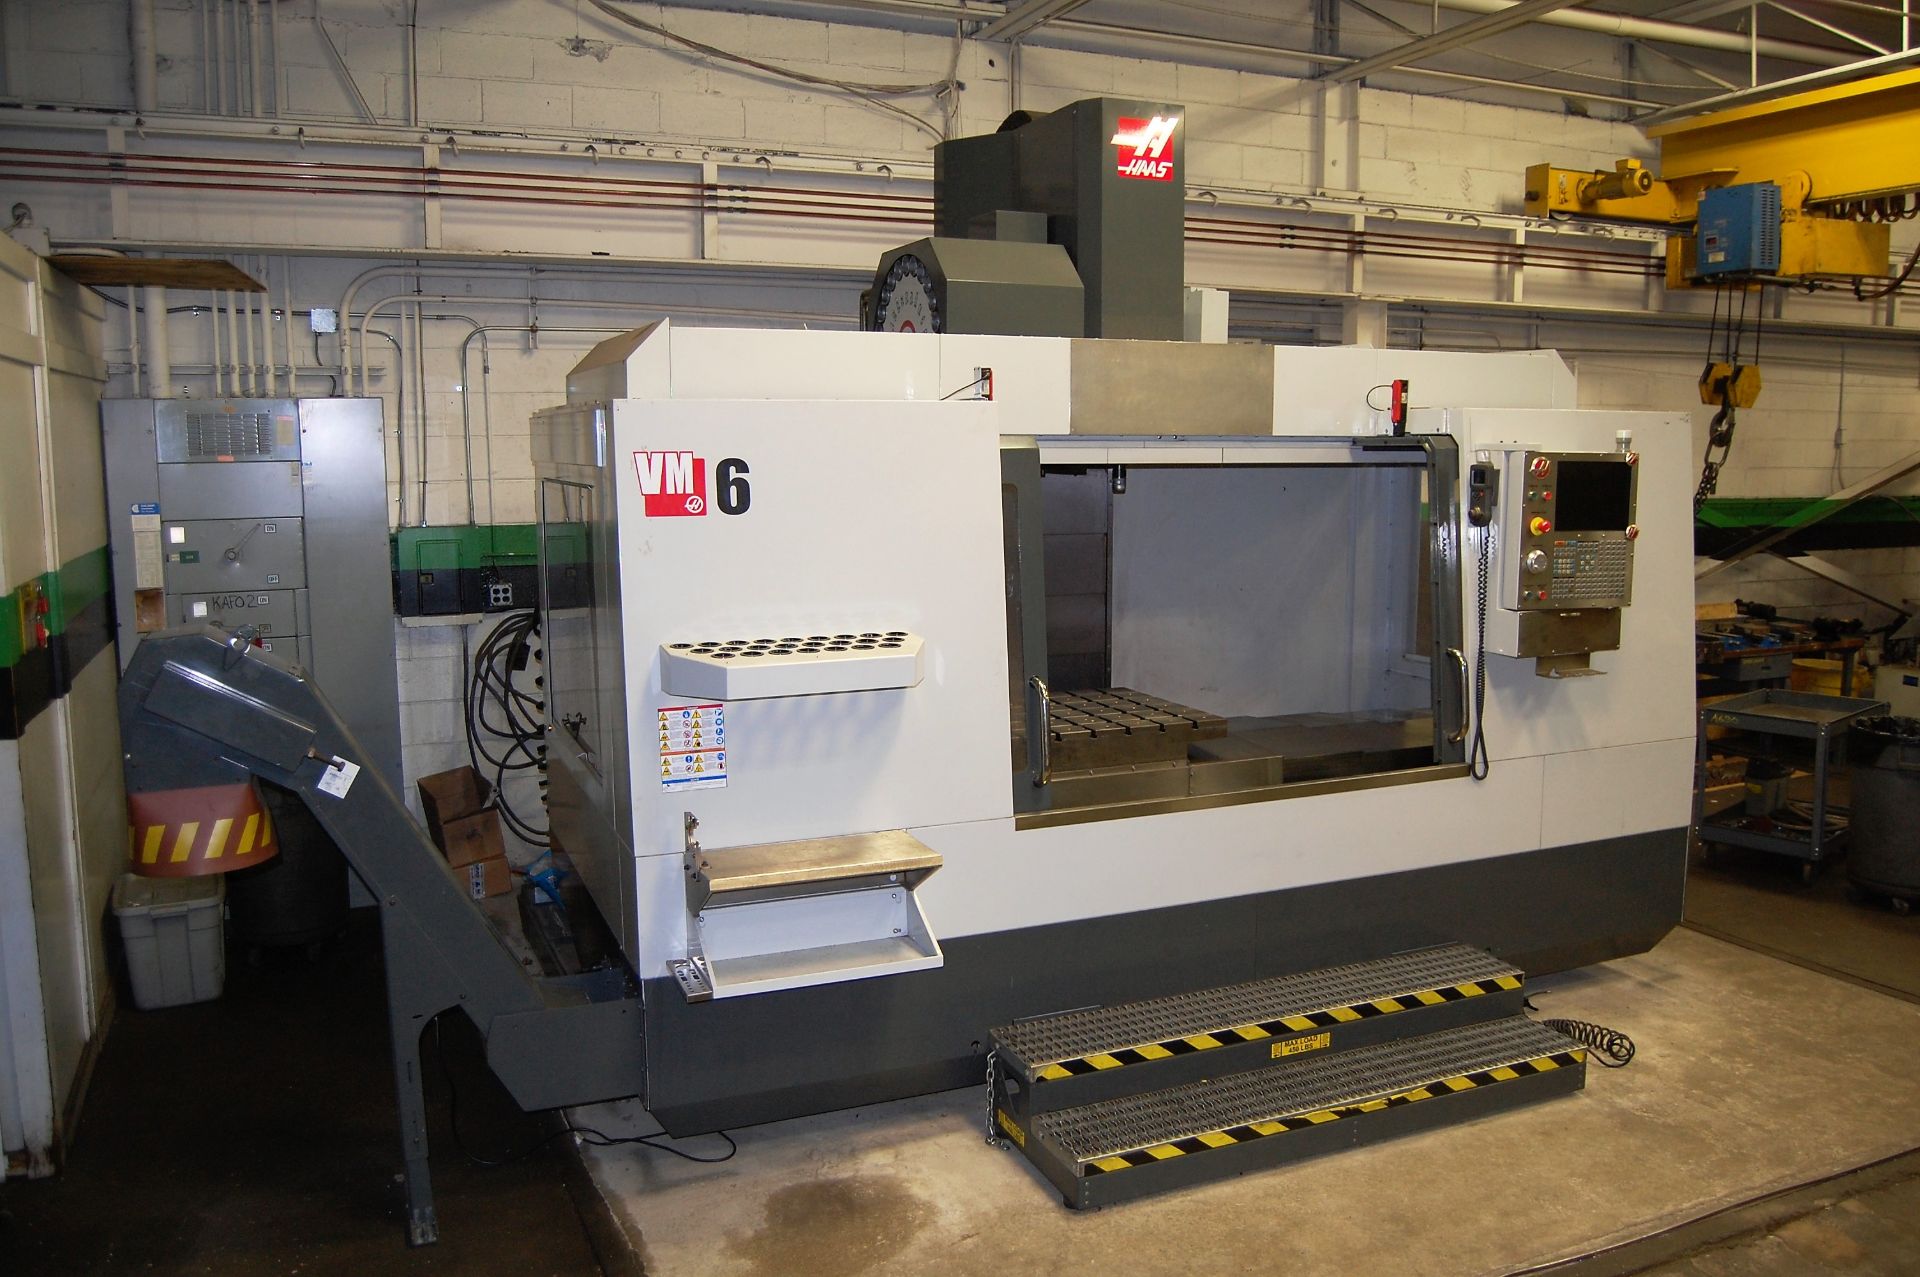 Haas Model VM-6 3-Axis Mold Maker CNC Vertical Machining Center - Image 4 of 17